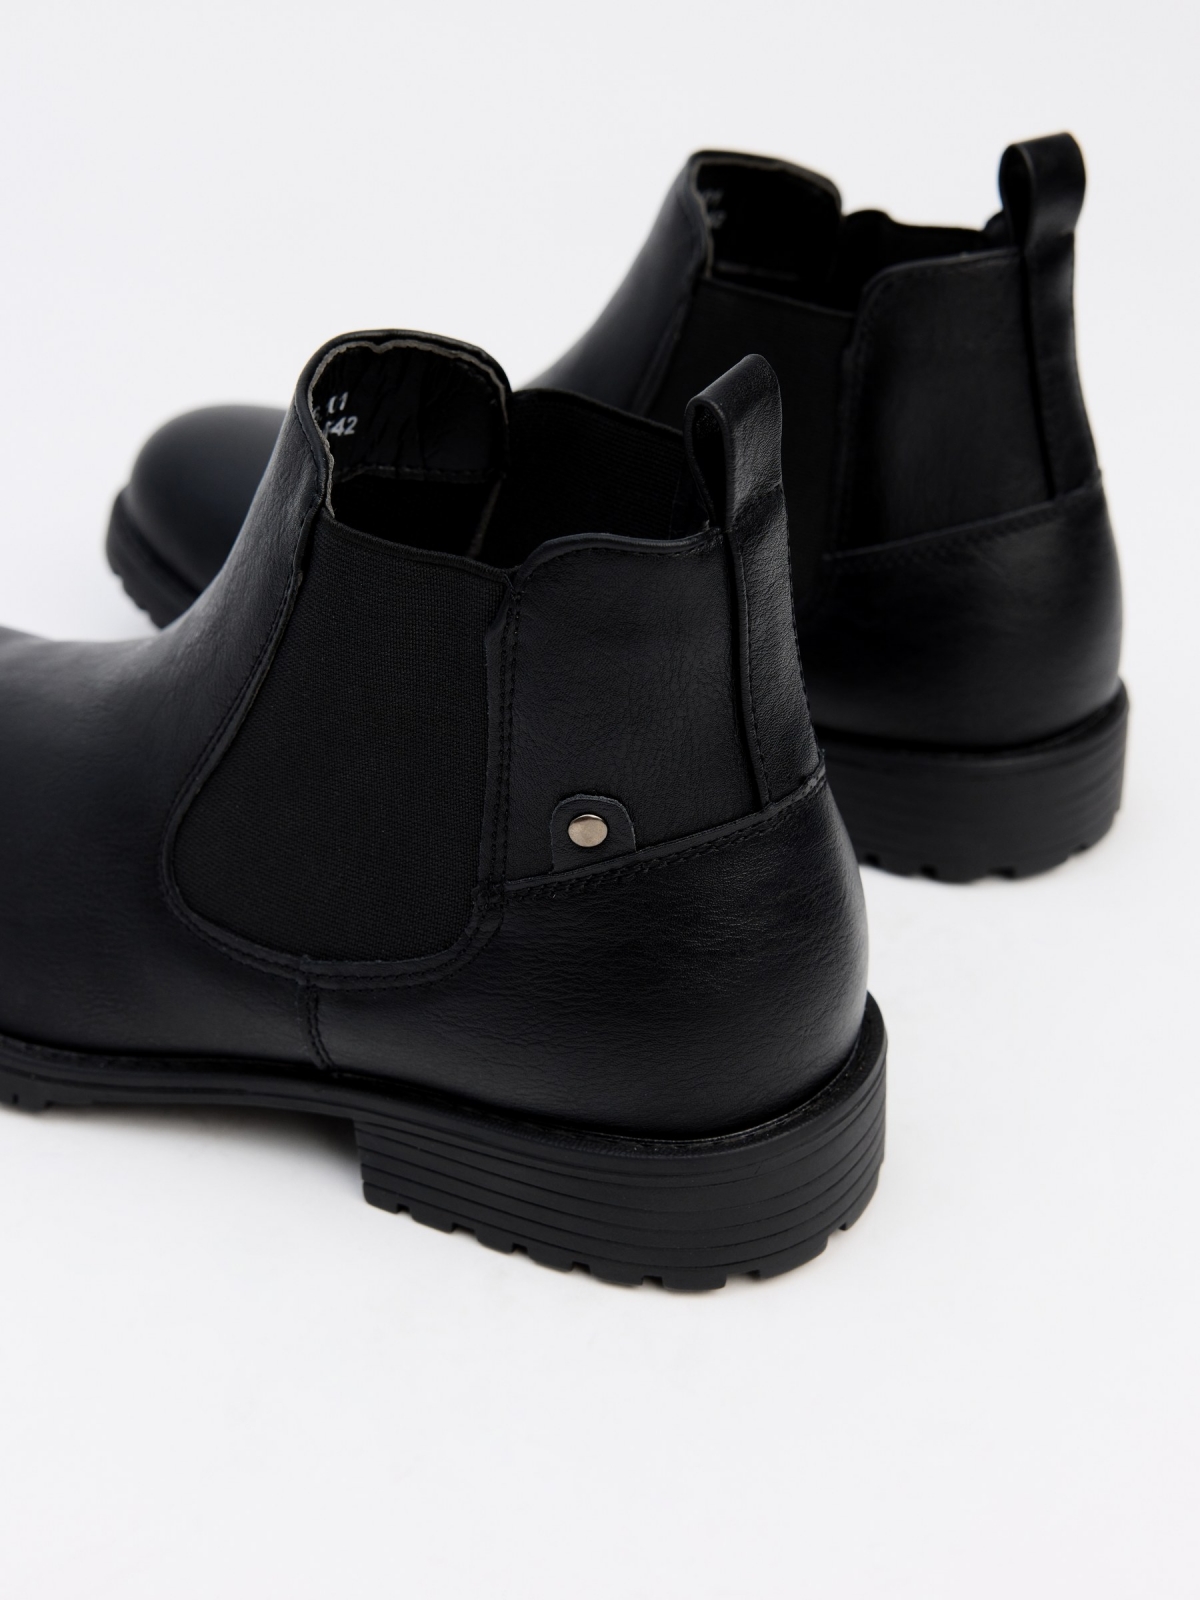 Black chelsea ankle boot black detail view